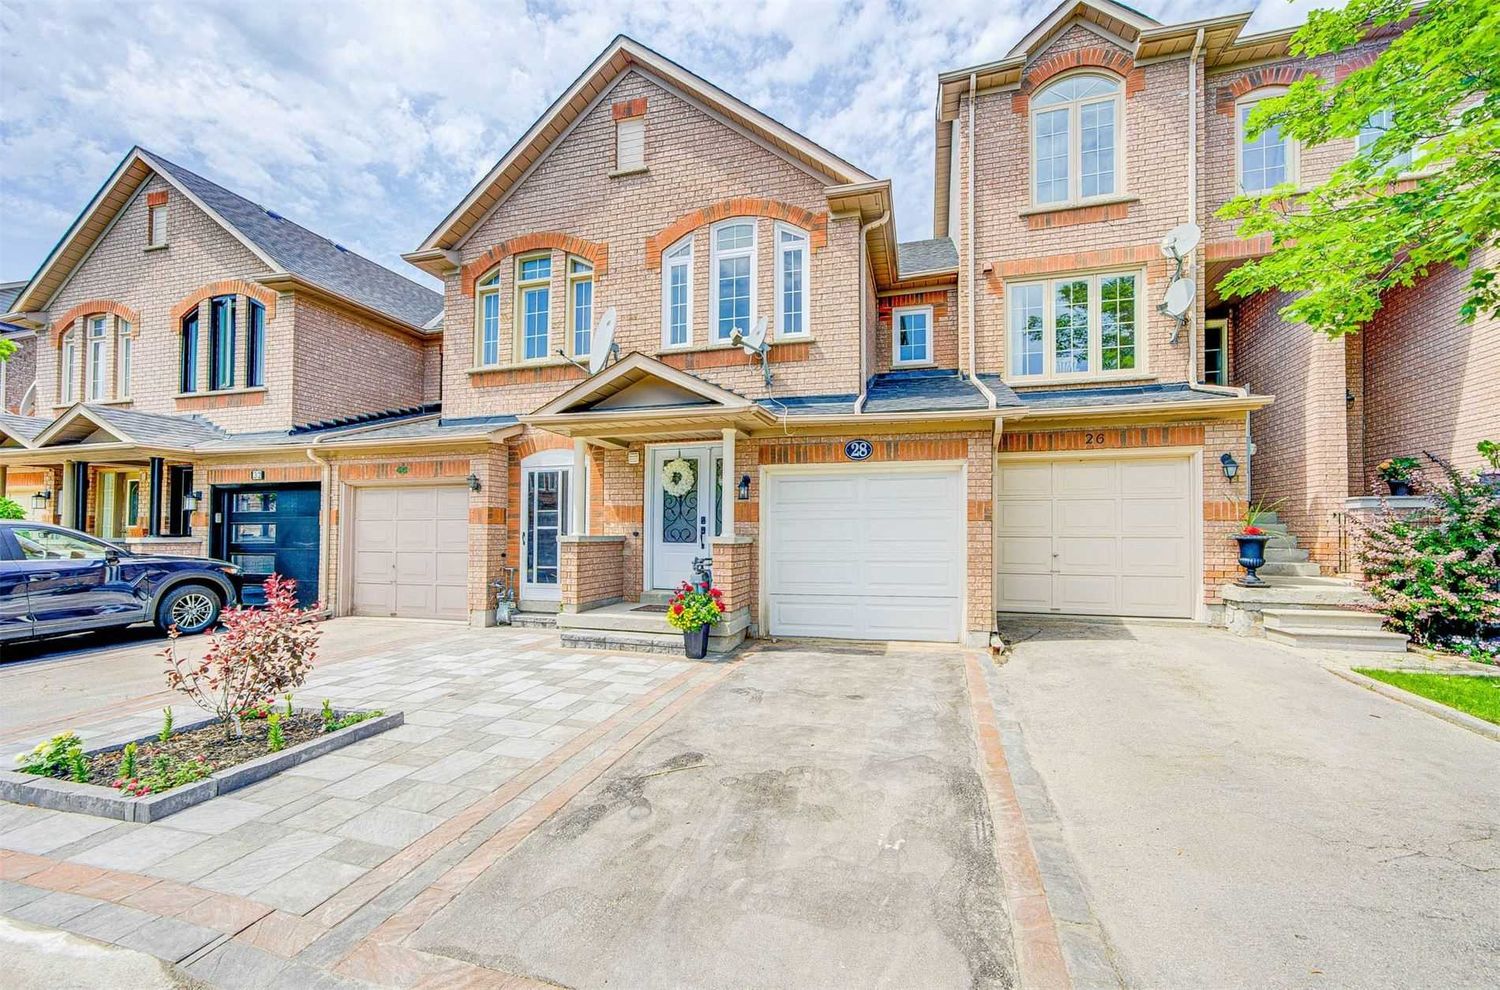 2-92 Tania Crescent. Tania Crescent Townhomes is located in  Vaughan, Toronto - image #2 of 3